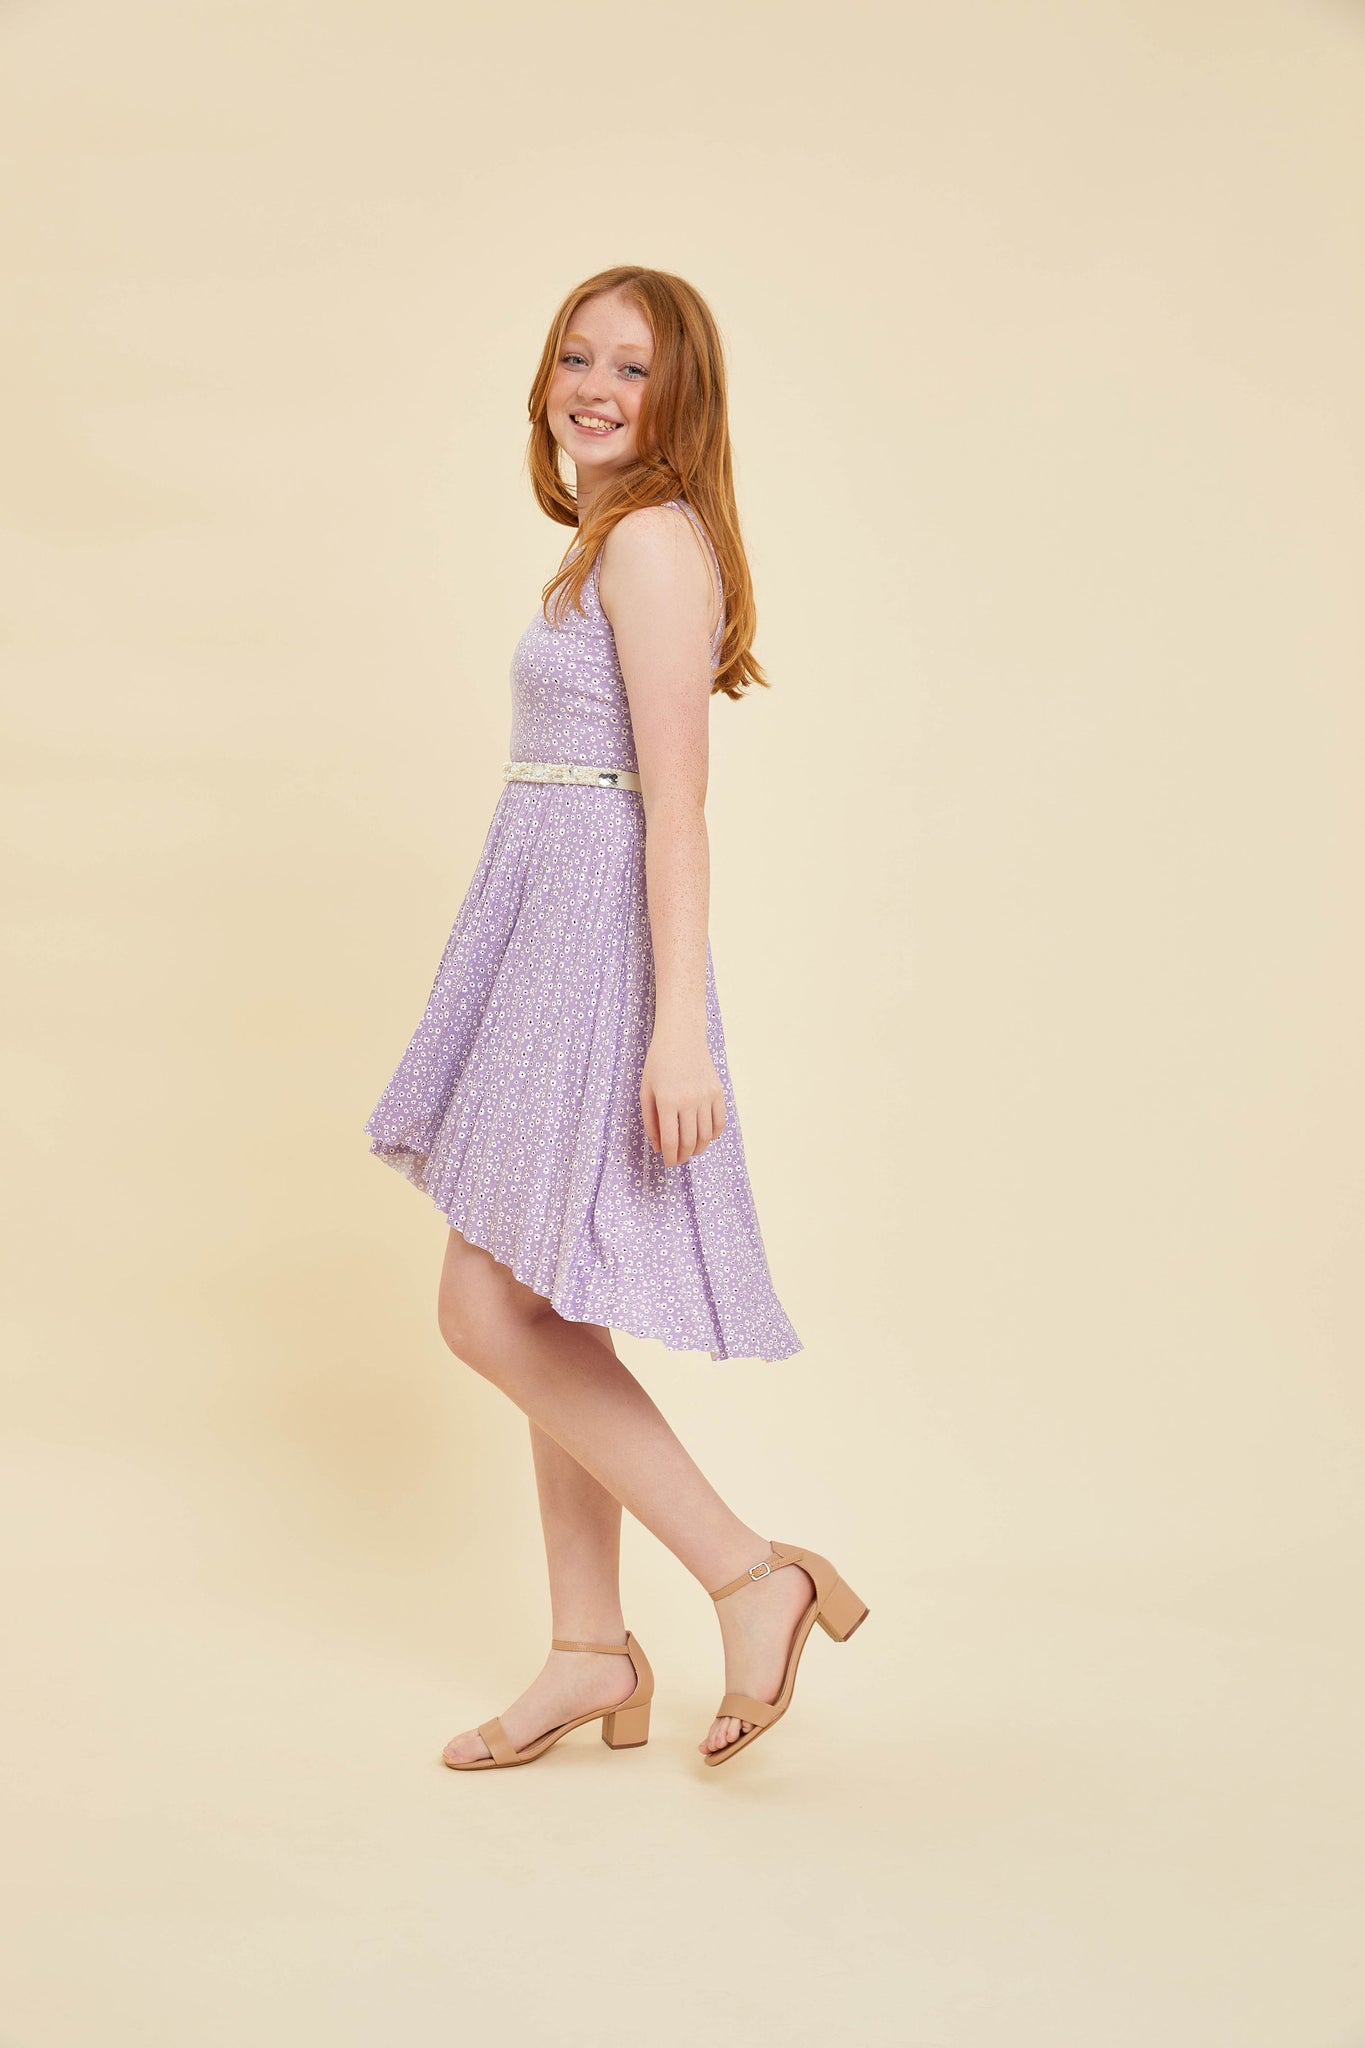 Red head in a lilac floral pleated dress with belt and nude shoe.